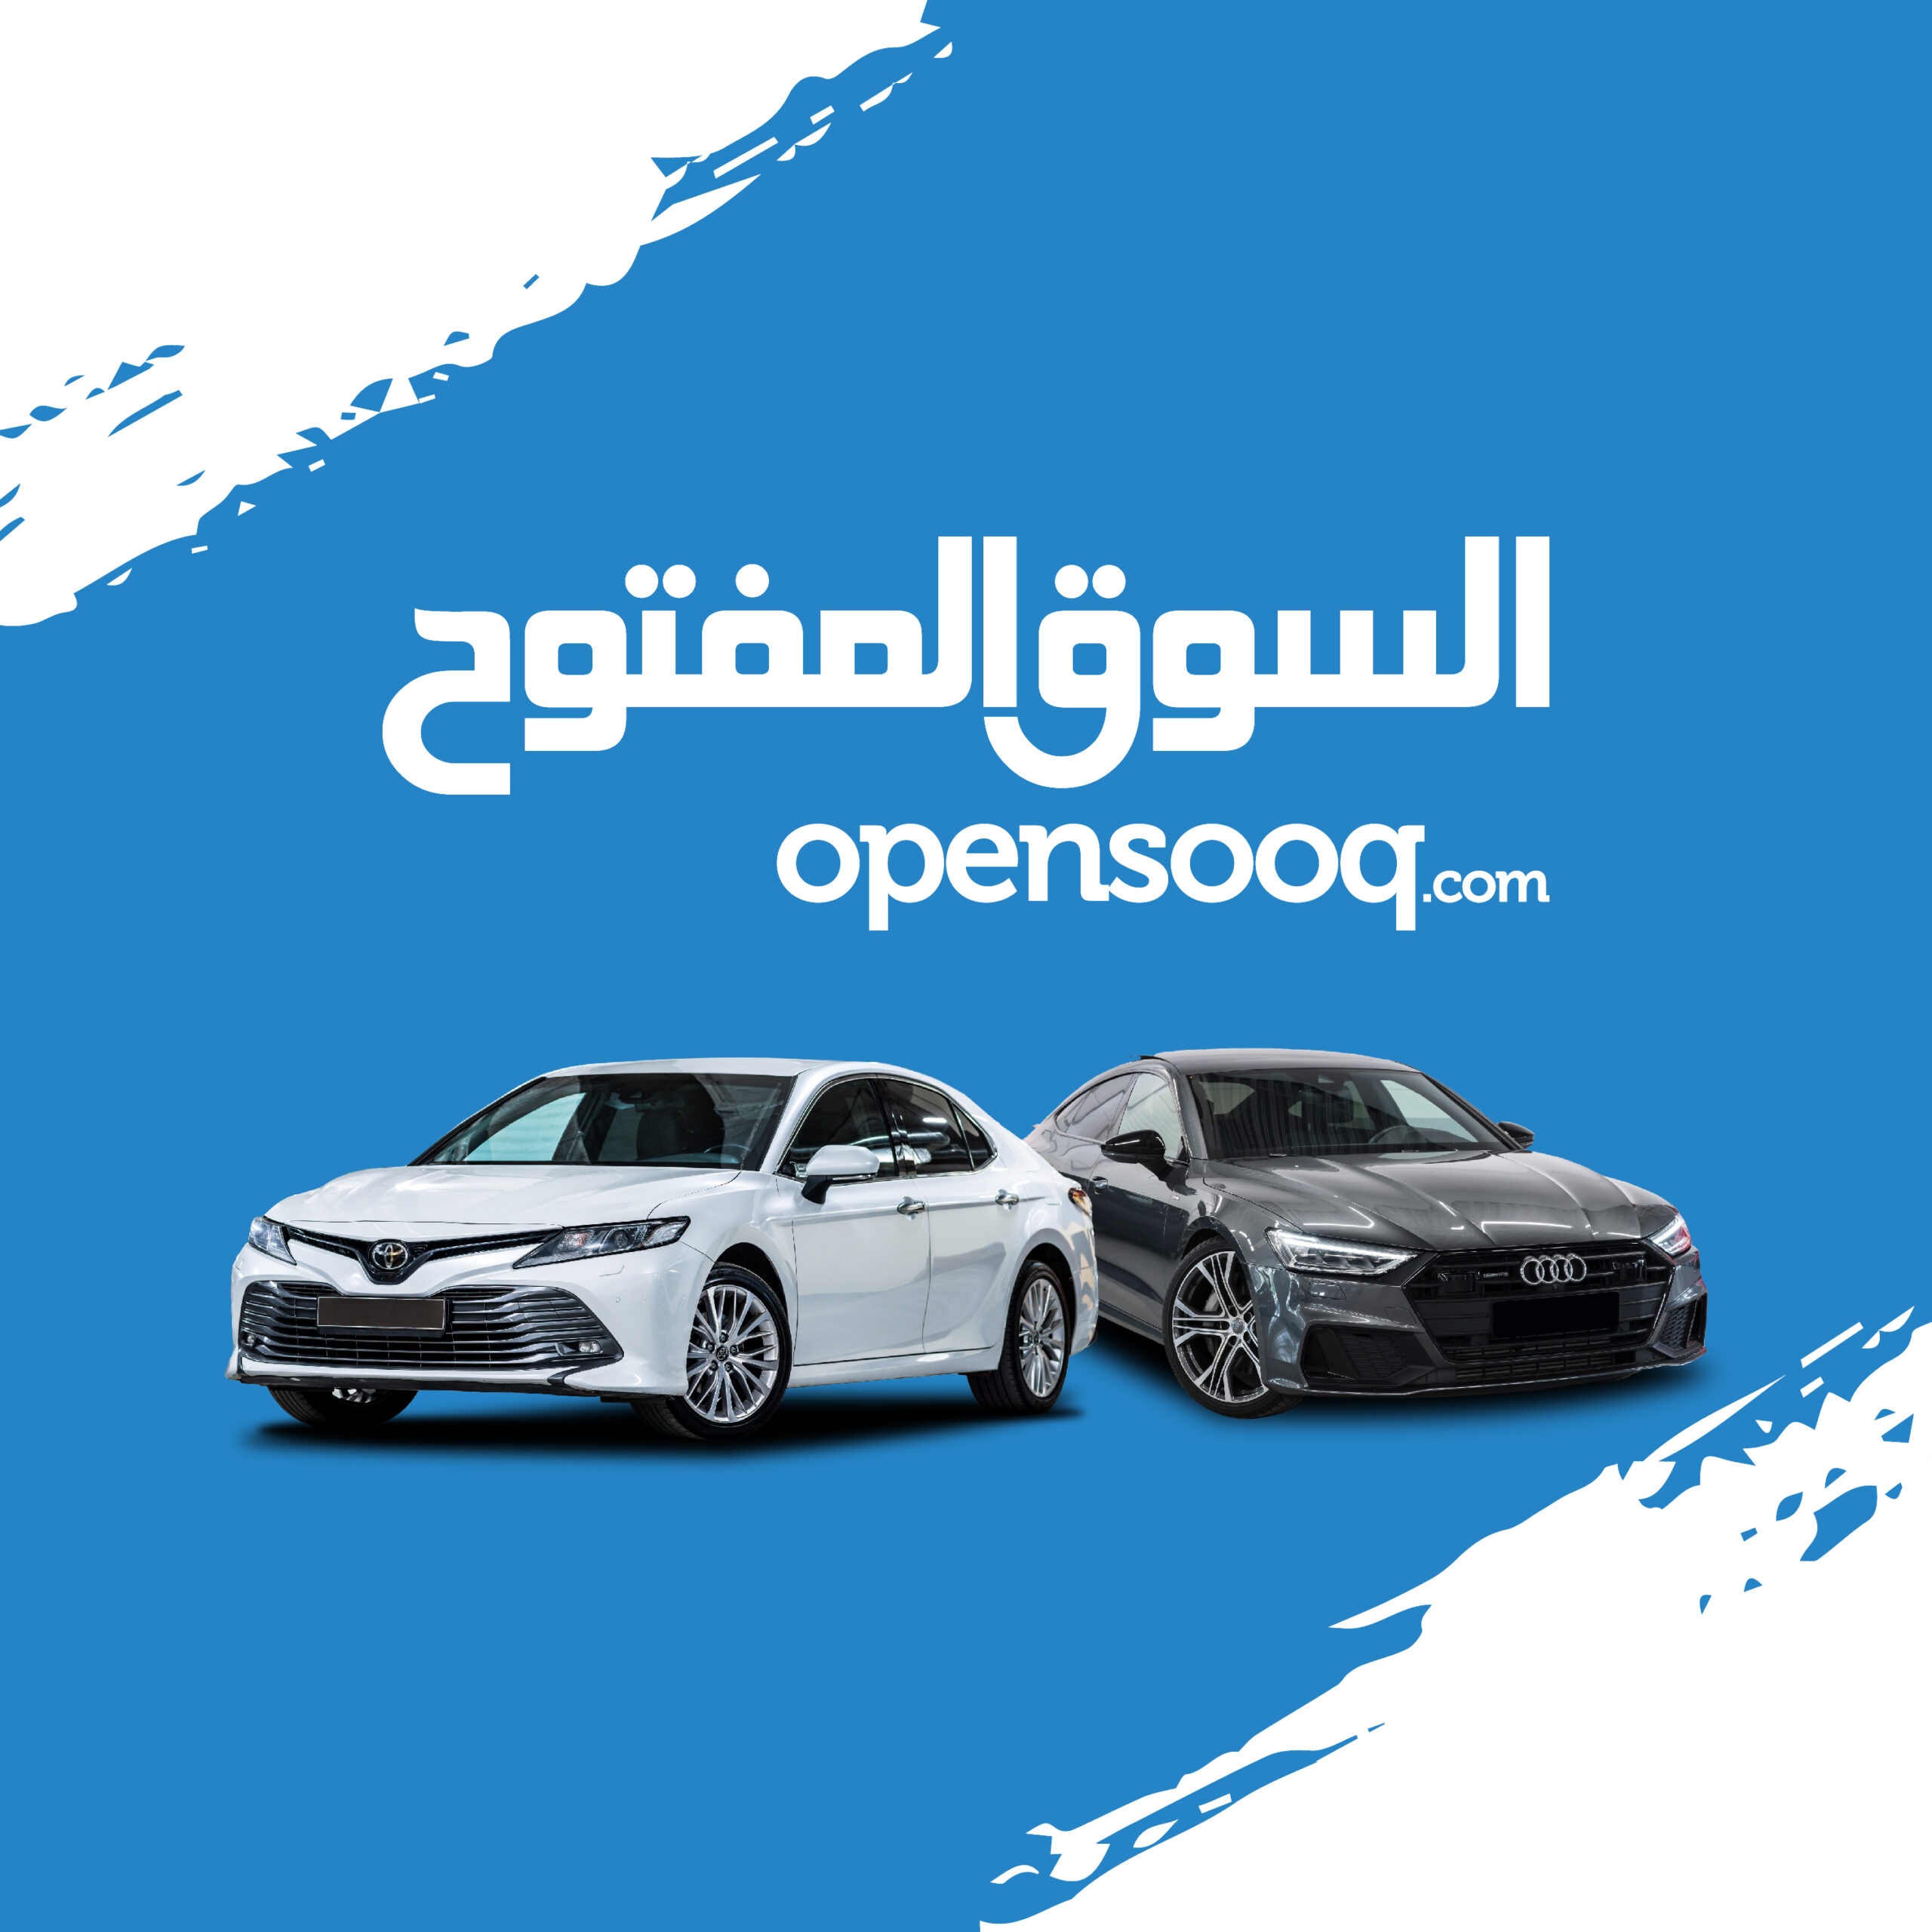 Quality Cars at Best Prices: OpenSooq has it All in the UAE